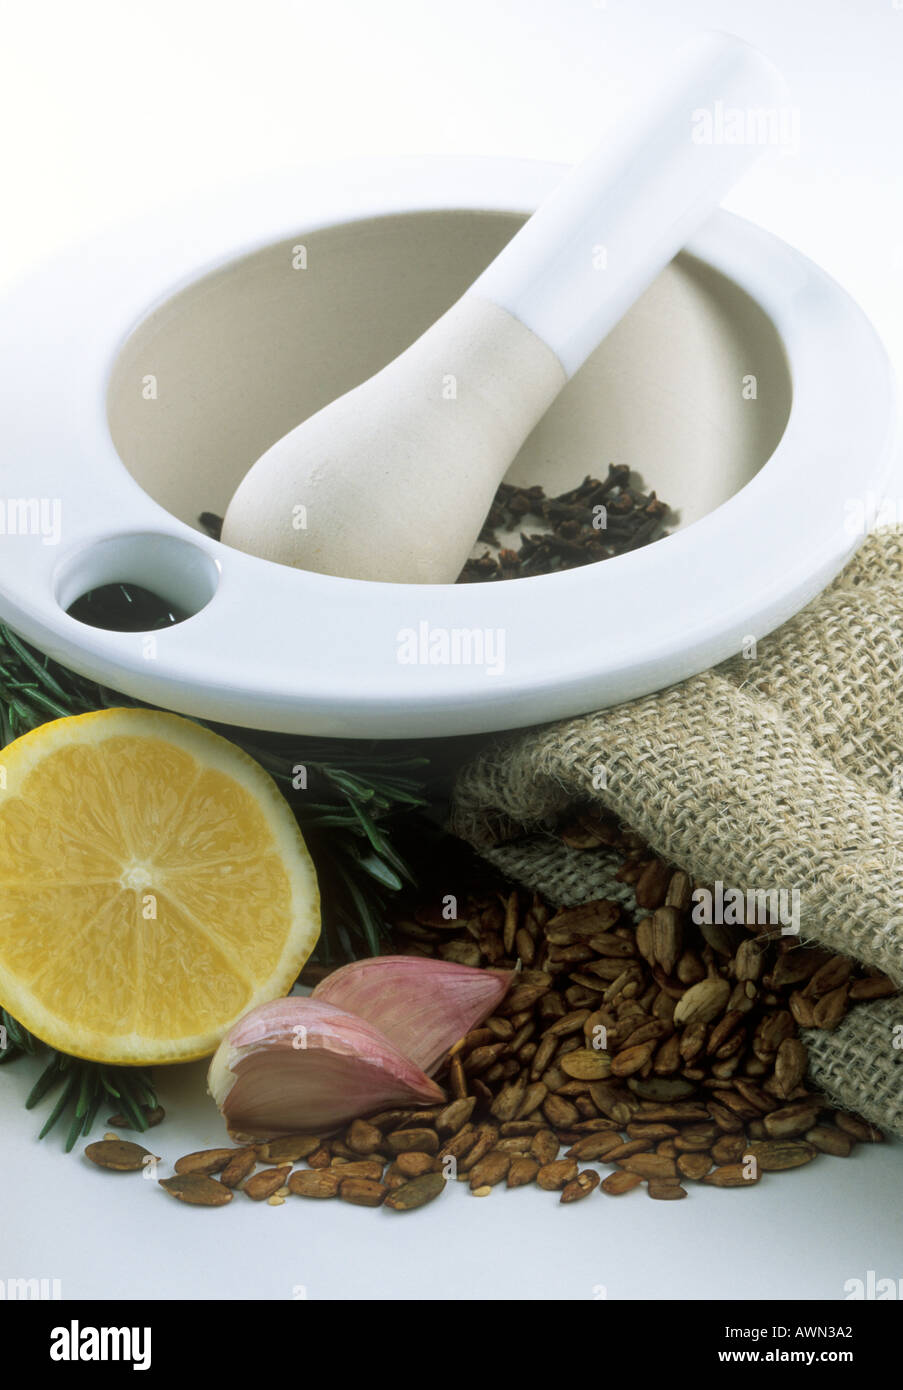 Pestle and Mortar with cloves and other Natural ingredients Stock Photo